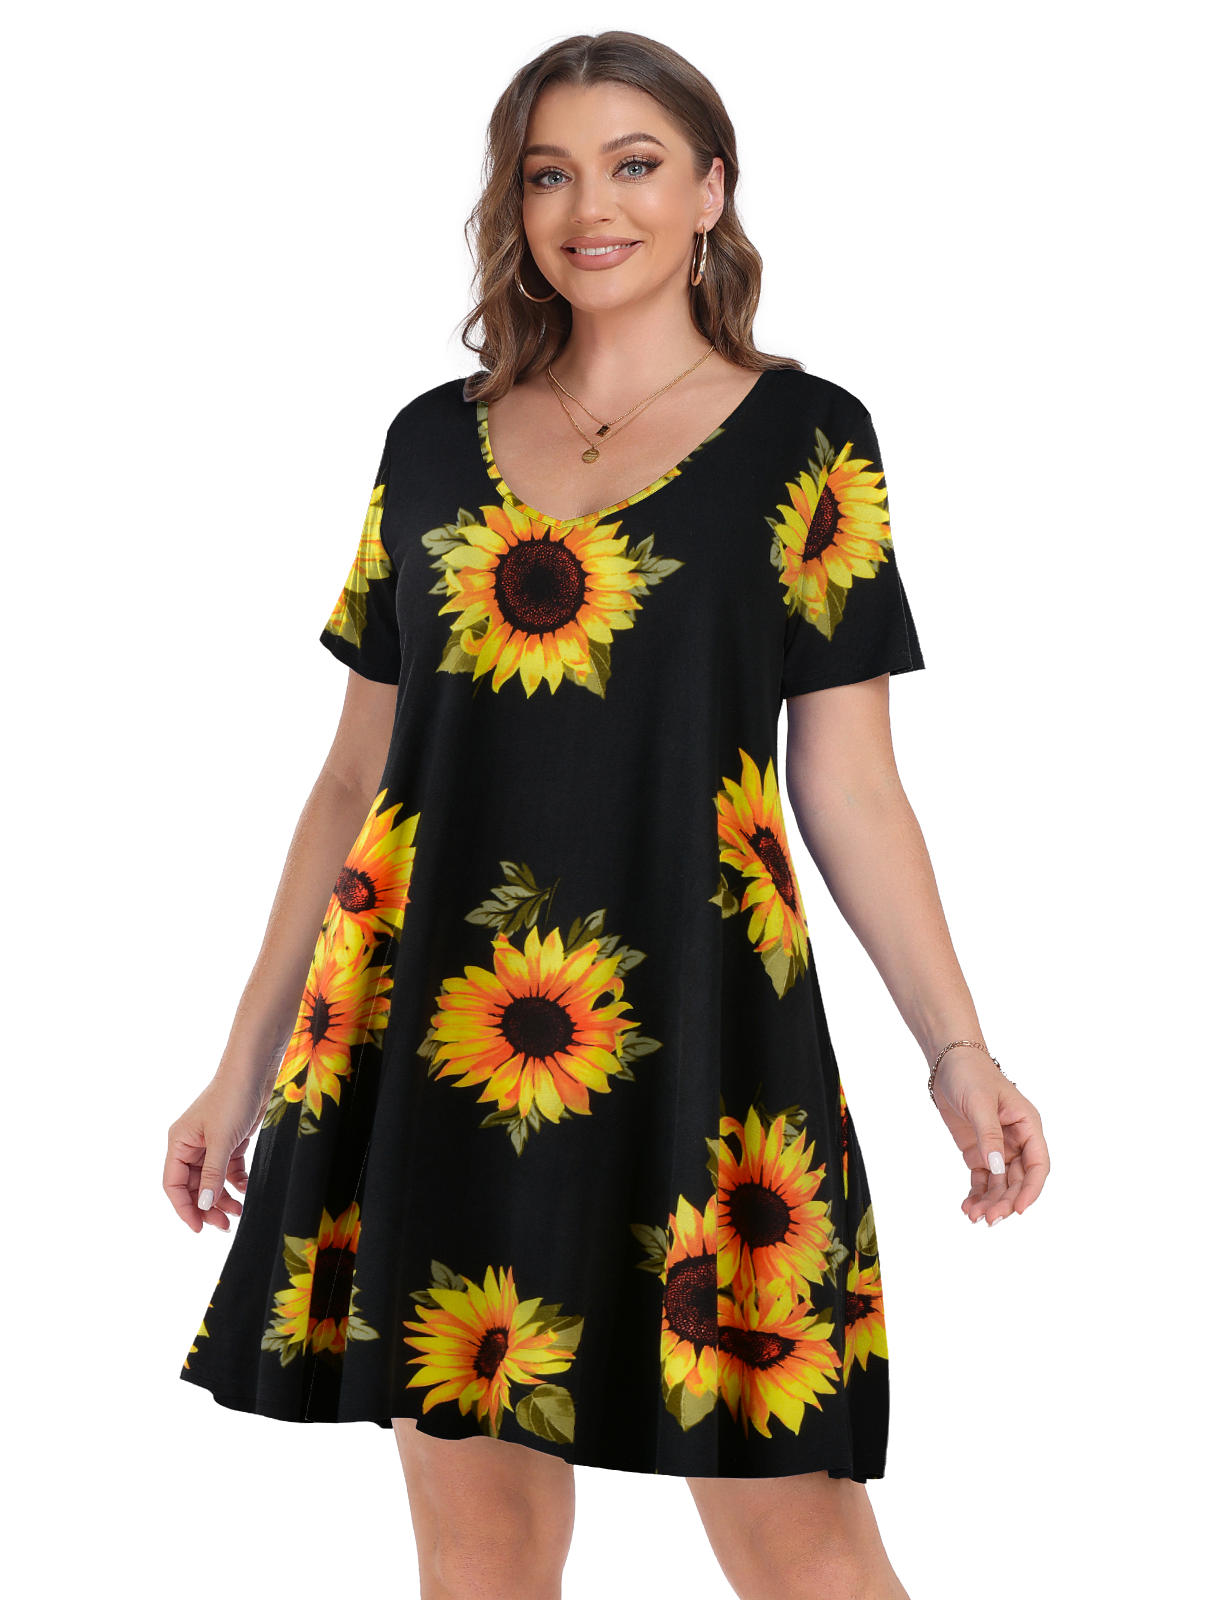 Plus Size Dresses 5X for Women, VEPKUL V Neck T Shirt Dress 2024 Short Sleeve Casual Loose Swing Summer Dress Floral Printed with Pockets - image 5 of 9